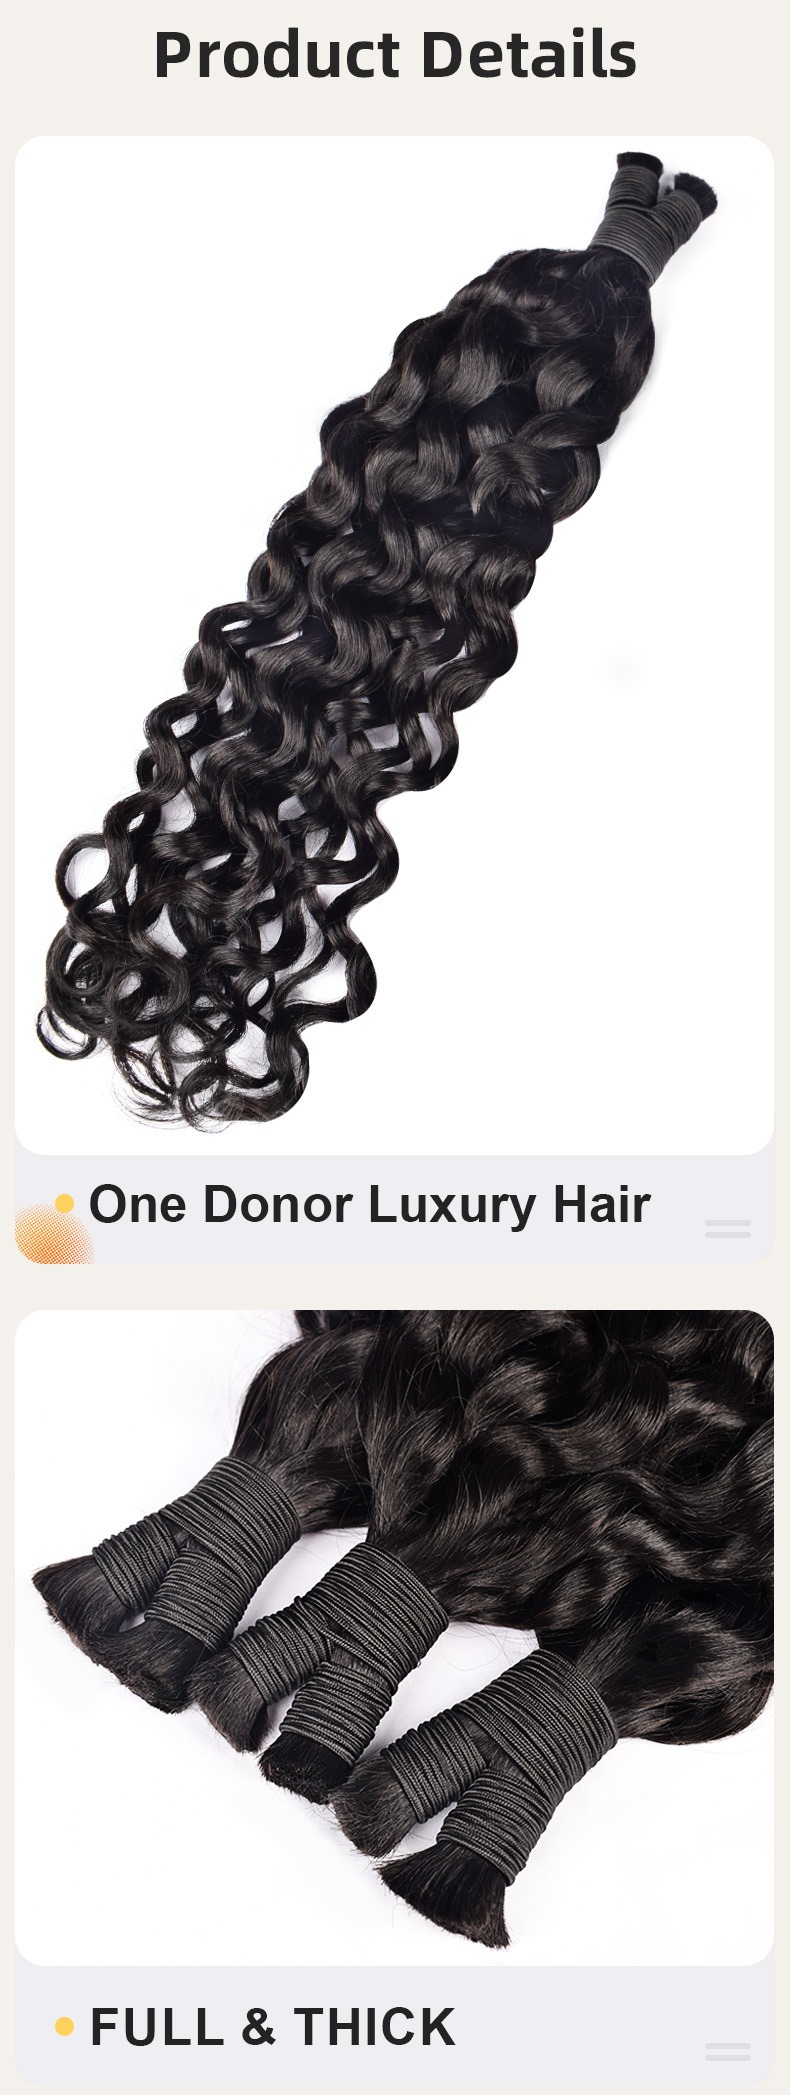 Enhance your hair's texture with our Italian curly human hair extensions, perfect for bulk hair